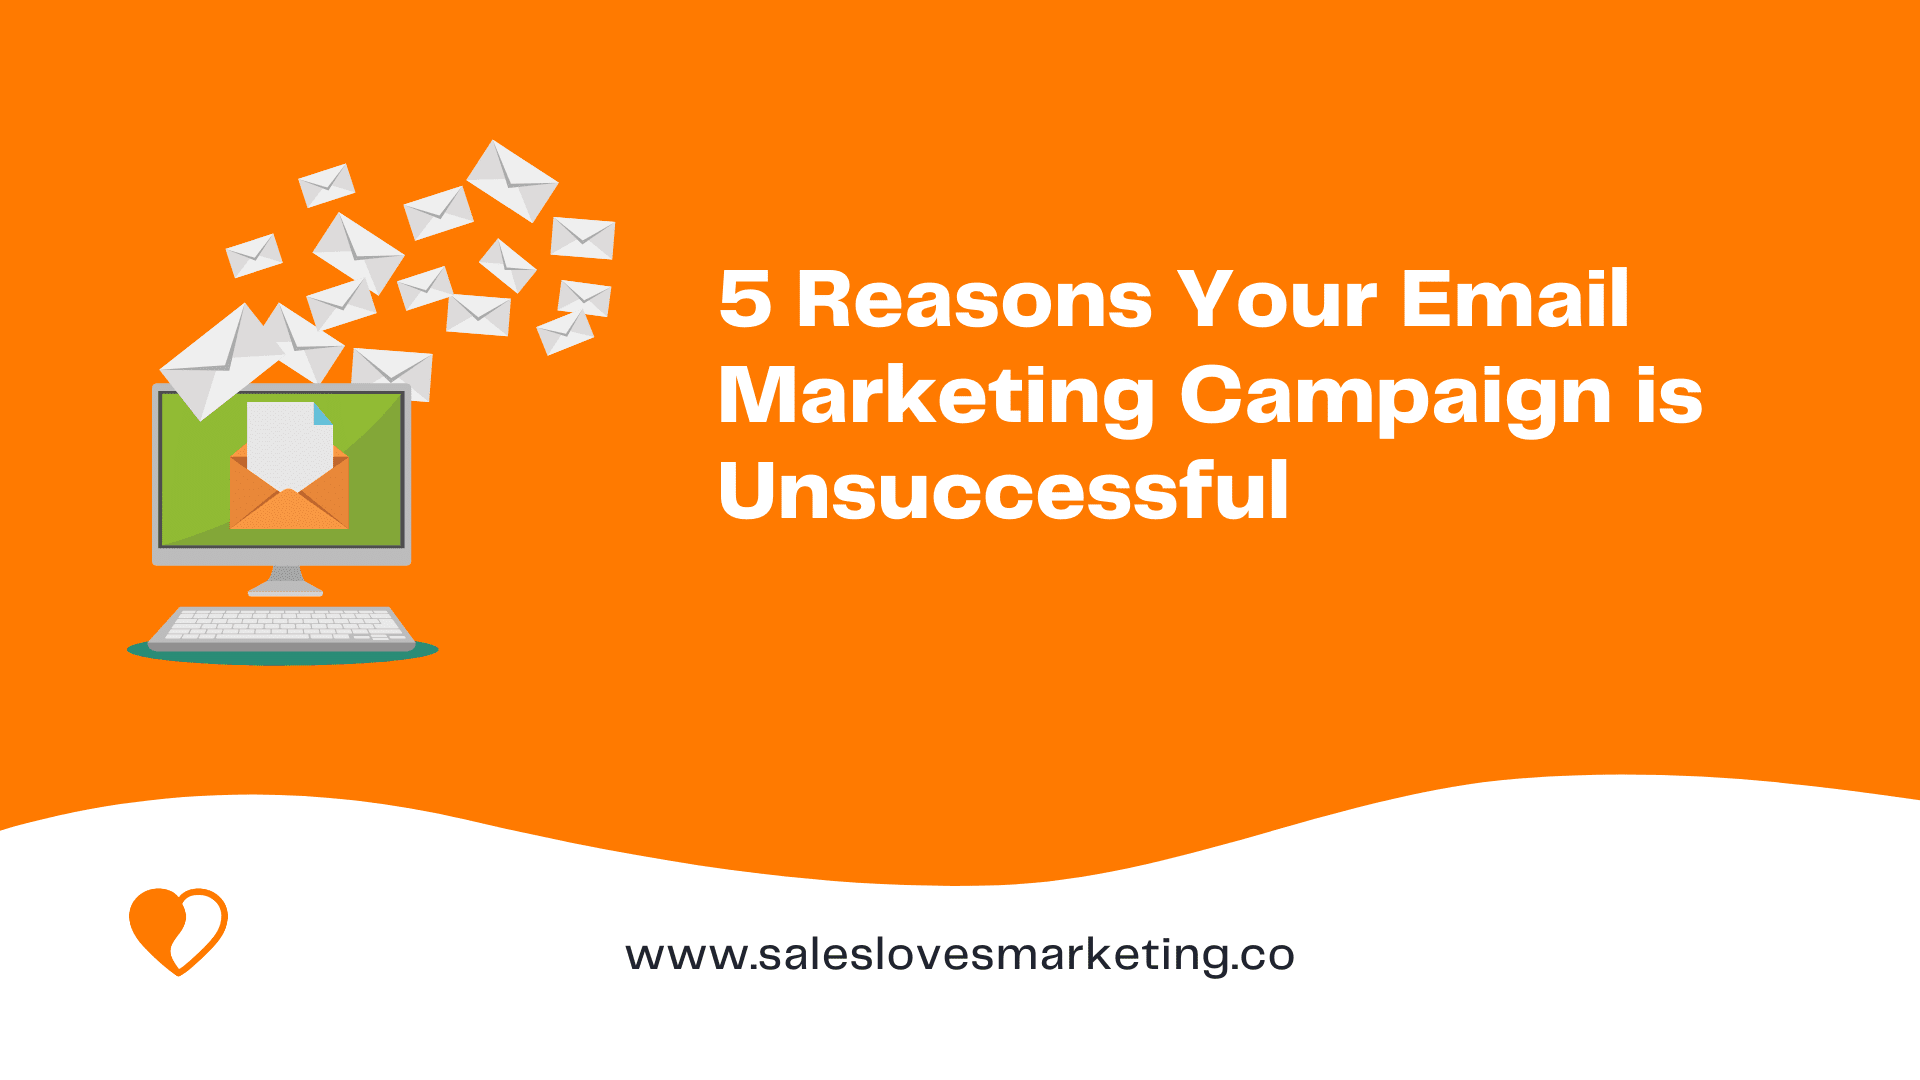 5 Reasons Your Email Marketing Campaign is Unsuccessful